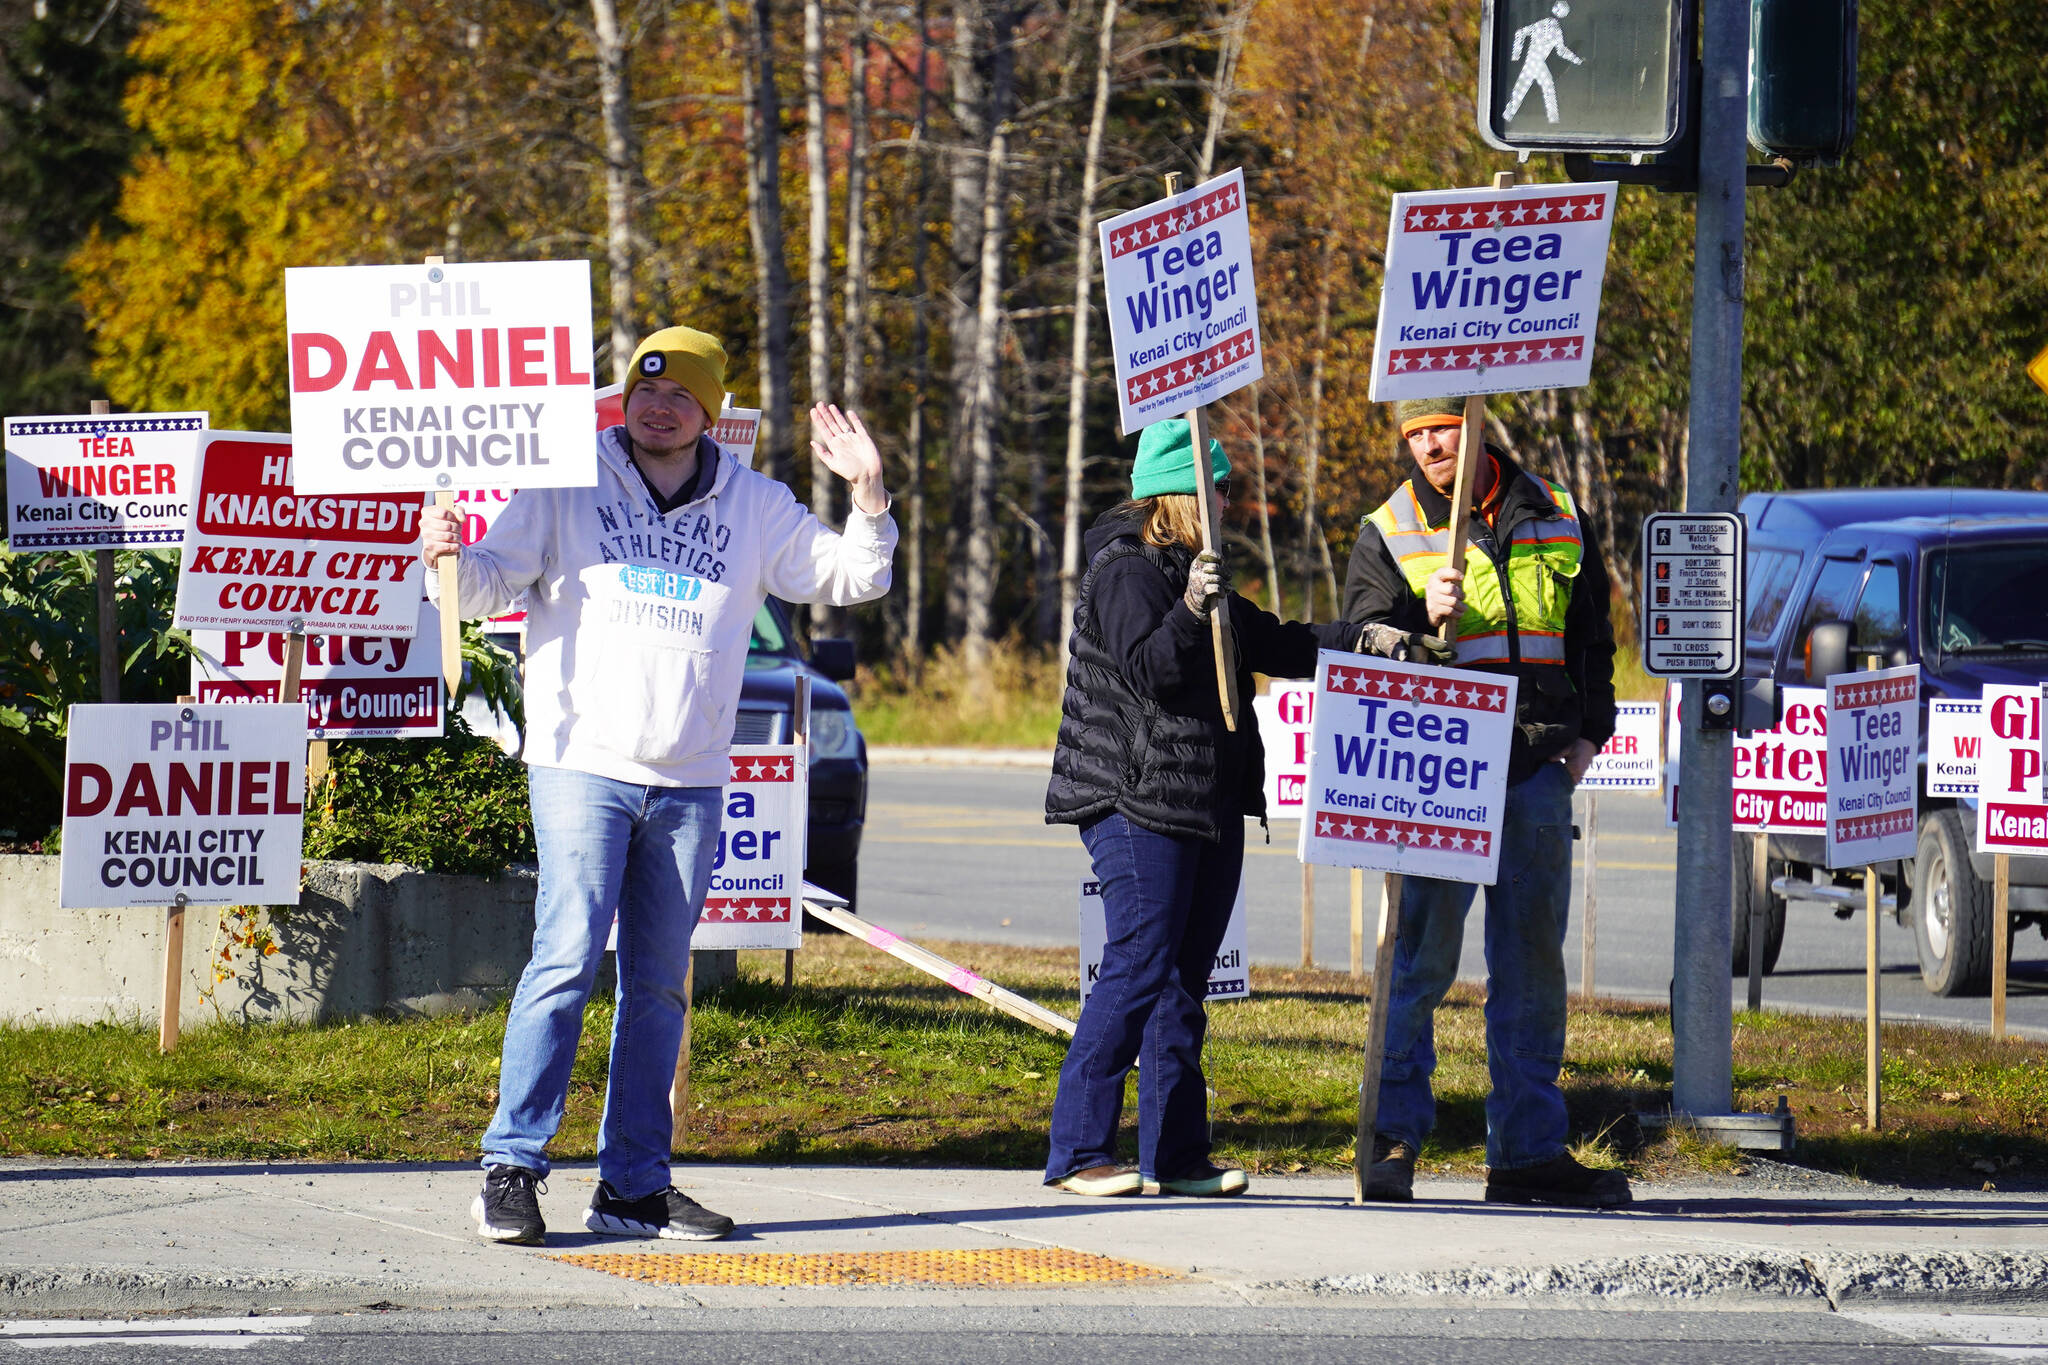 Phil Daniel, left, joins supporters of Teea Winger in waving signs on the corner of Bridge Access Road and the Kenai Spur Highway in Kenai, Alaska, for election day on Tuesday, Oct. 3, 2023. (Jake Dye/Peninsula Clarion)